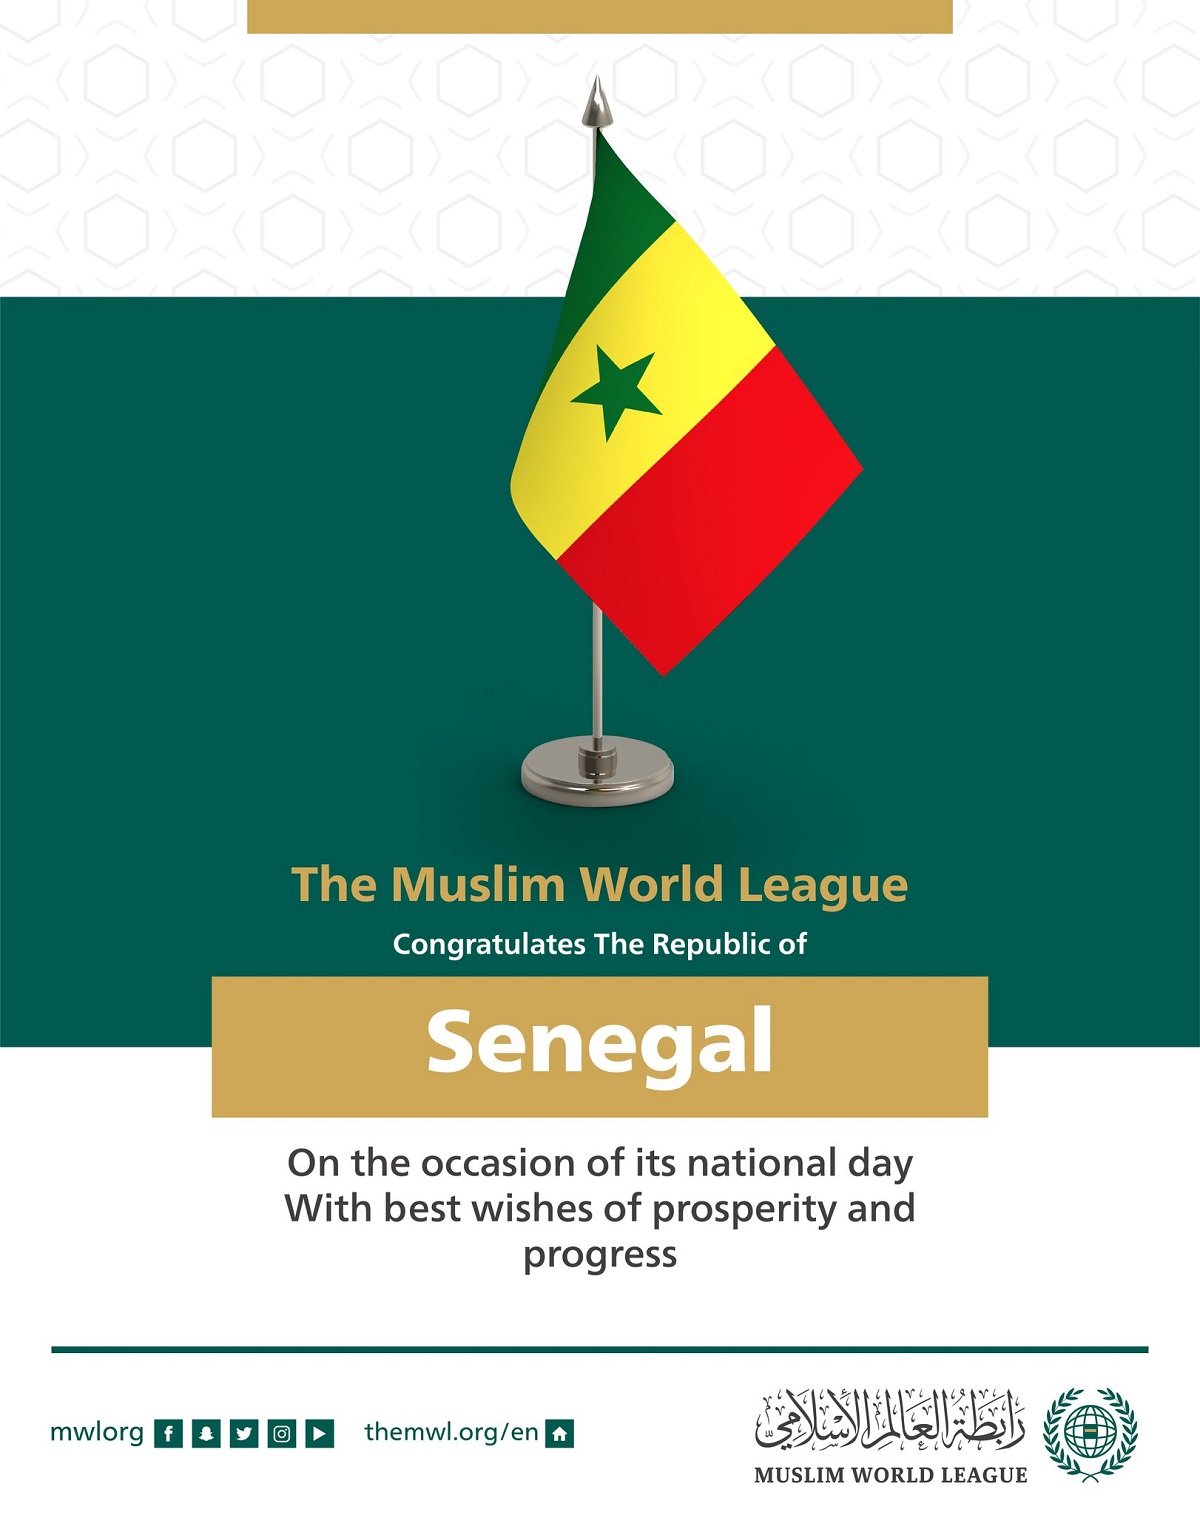 The Muslim World League Congratulates the Republic of Senegal on the occasion of its national day.